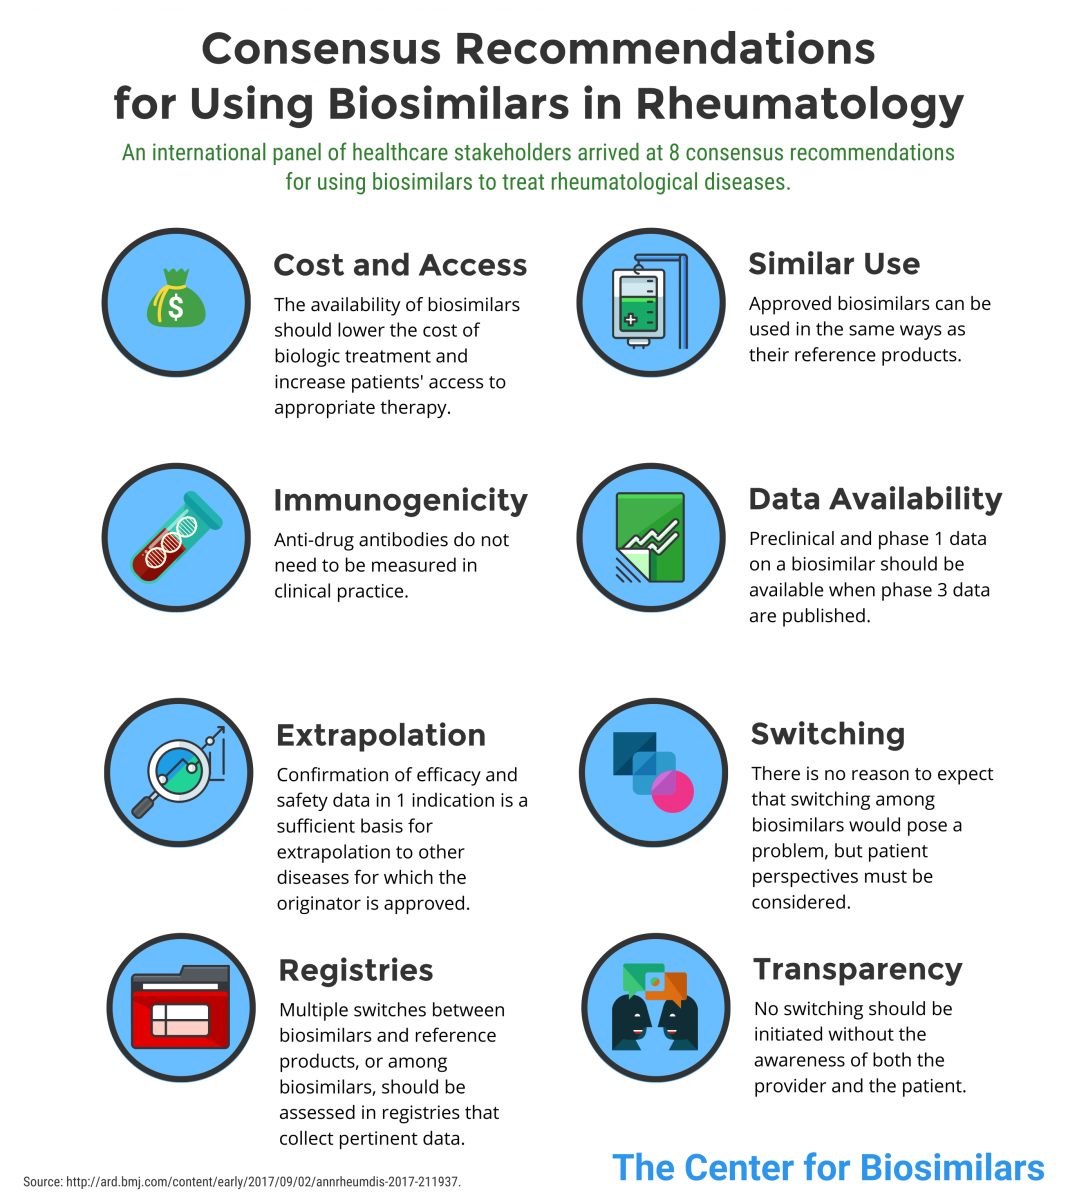 infographic detailing 8 recommendations for the use of biosimilars in rheumatology as proposed by an international panel of stakeholders and experts